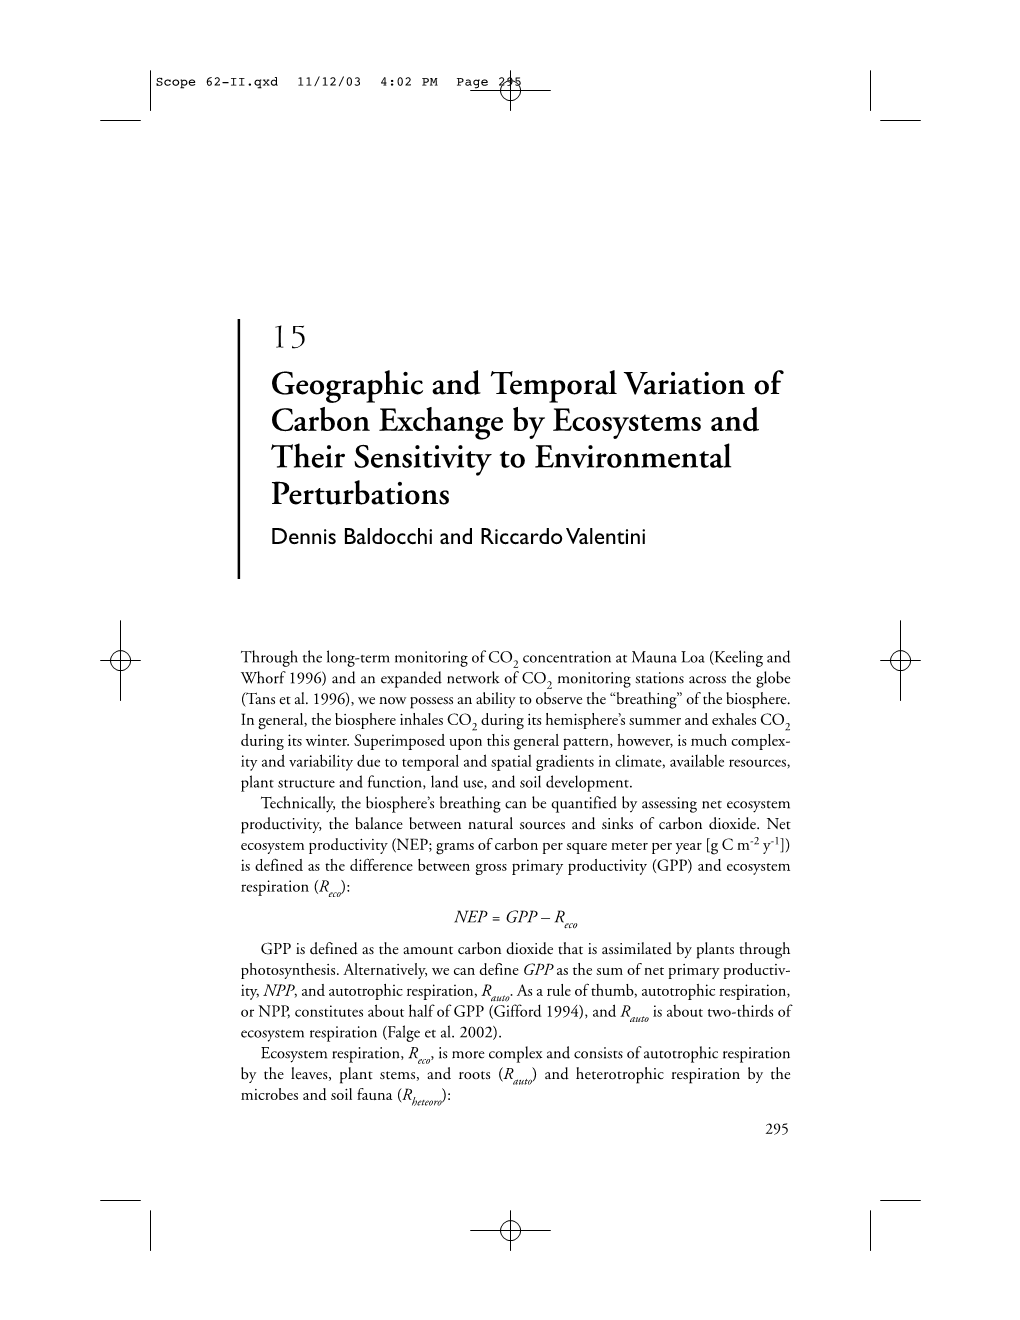 15 Geographic and Temporal Variation of Carbon Exchange by Ecosystems and Their Sensitivity to Environmental Perturbations Dennis Baldocchi and Riccardo Valentini